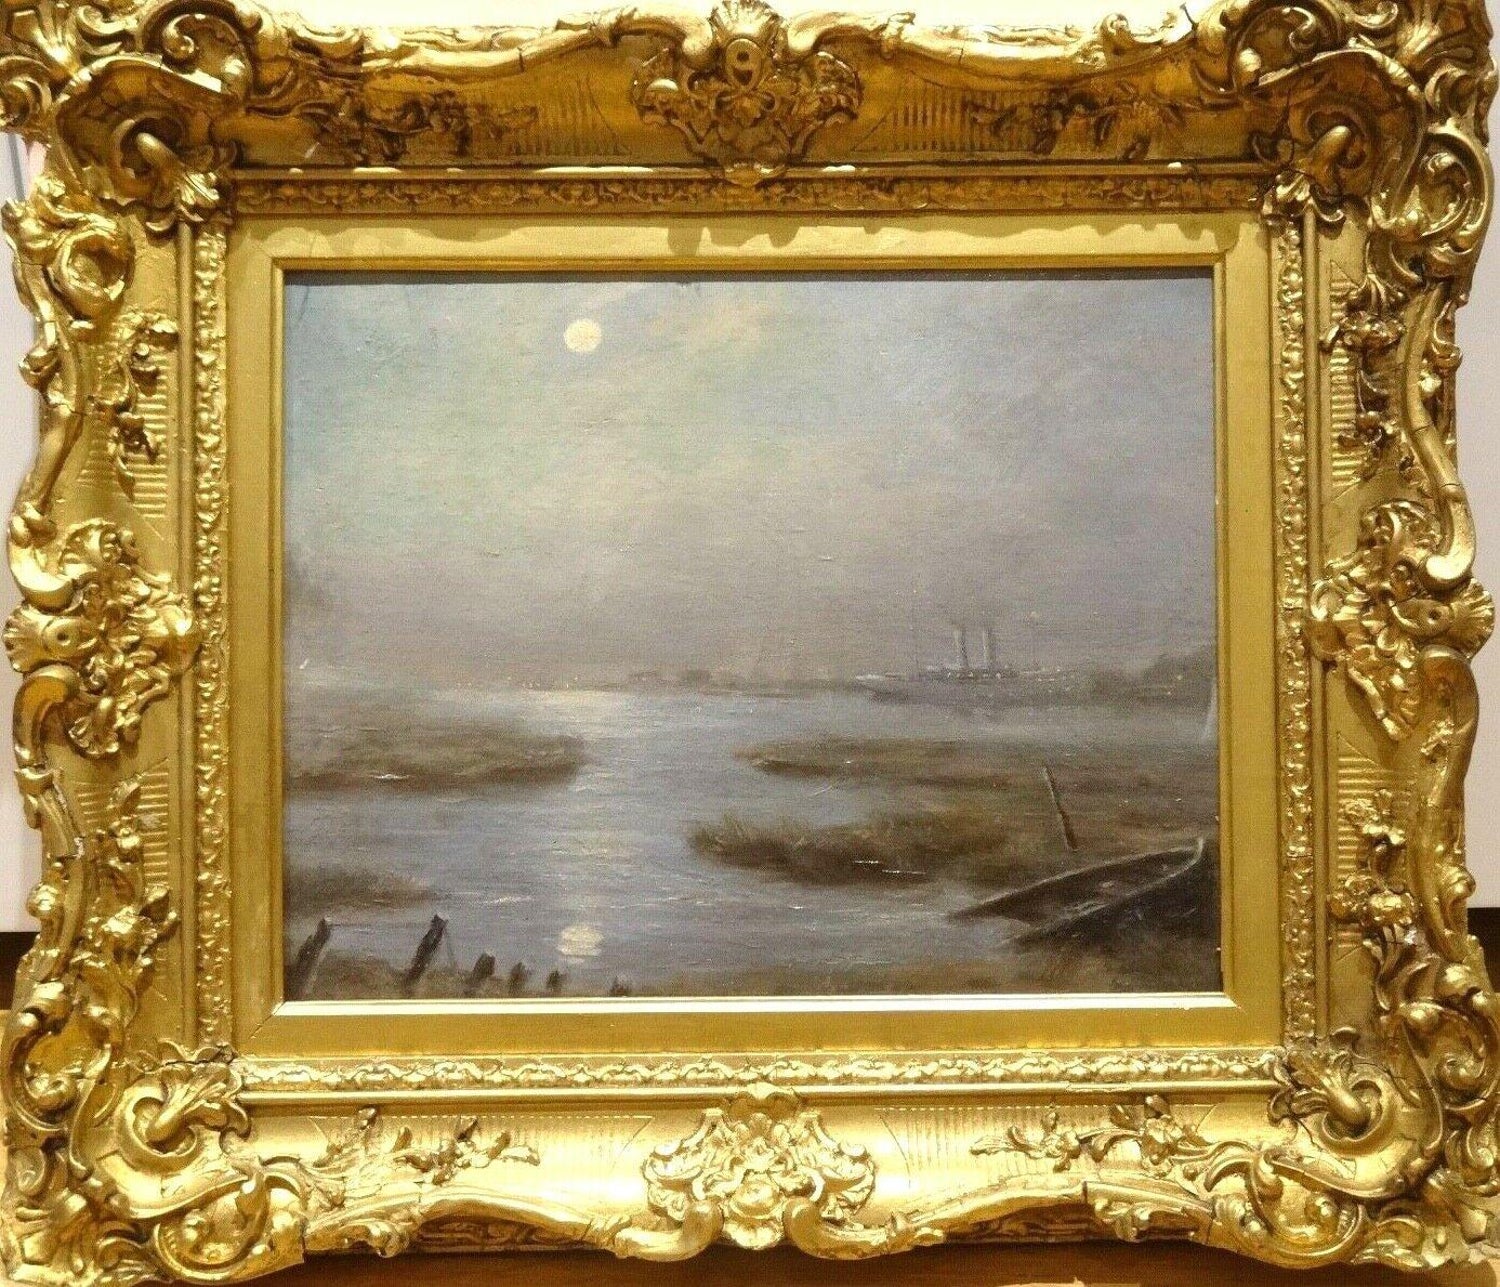 Thames River Moonlit Nocturne, 19th Century - James Abbot McNeill Whistler  For Sale at 1stDibs